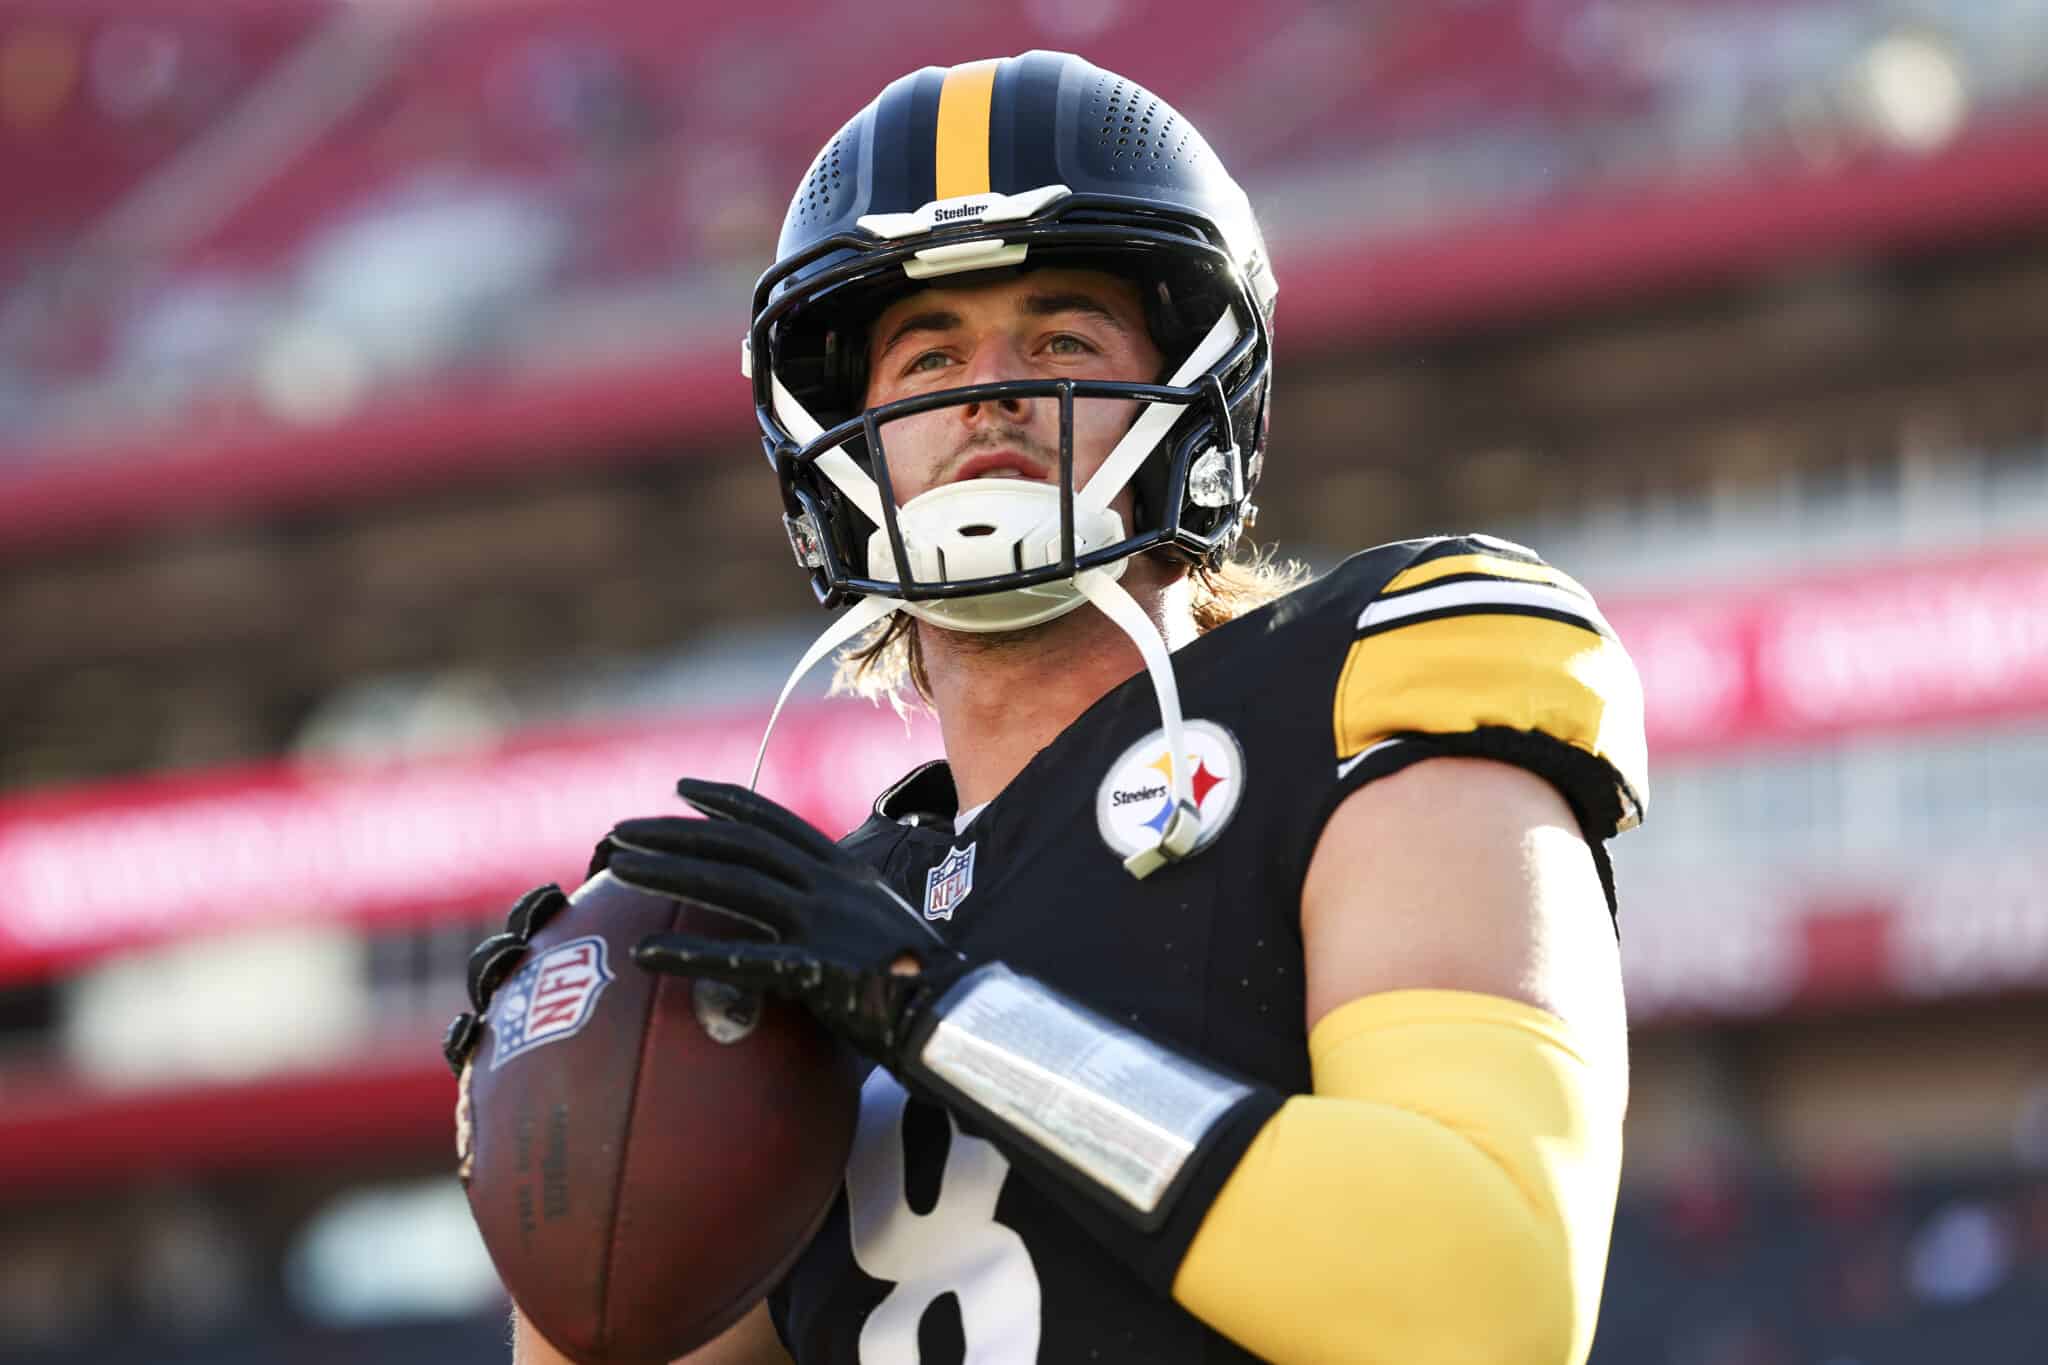 Freiermuth looking to make the leap in second year with Steelers